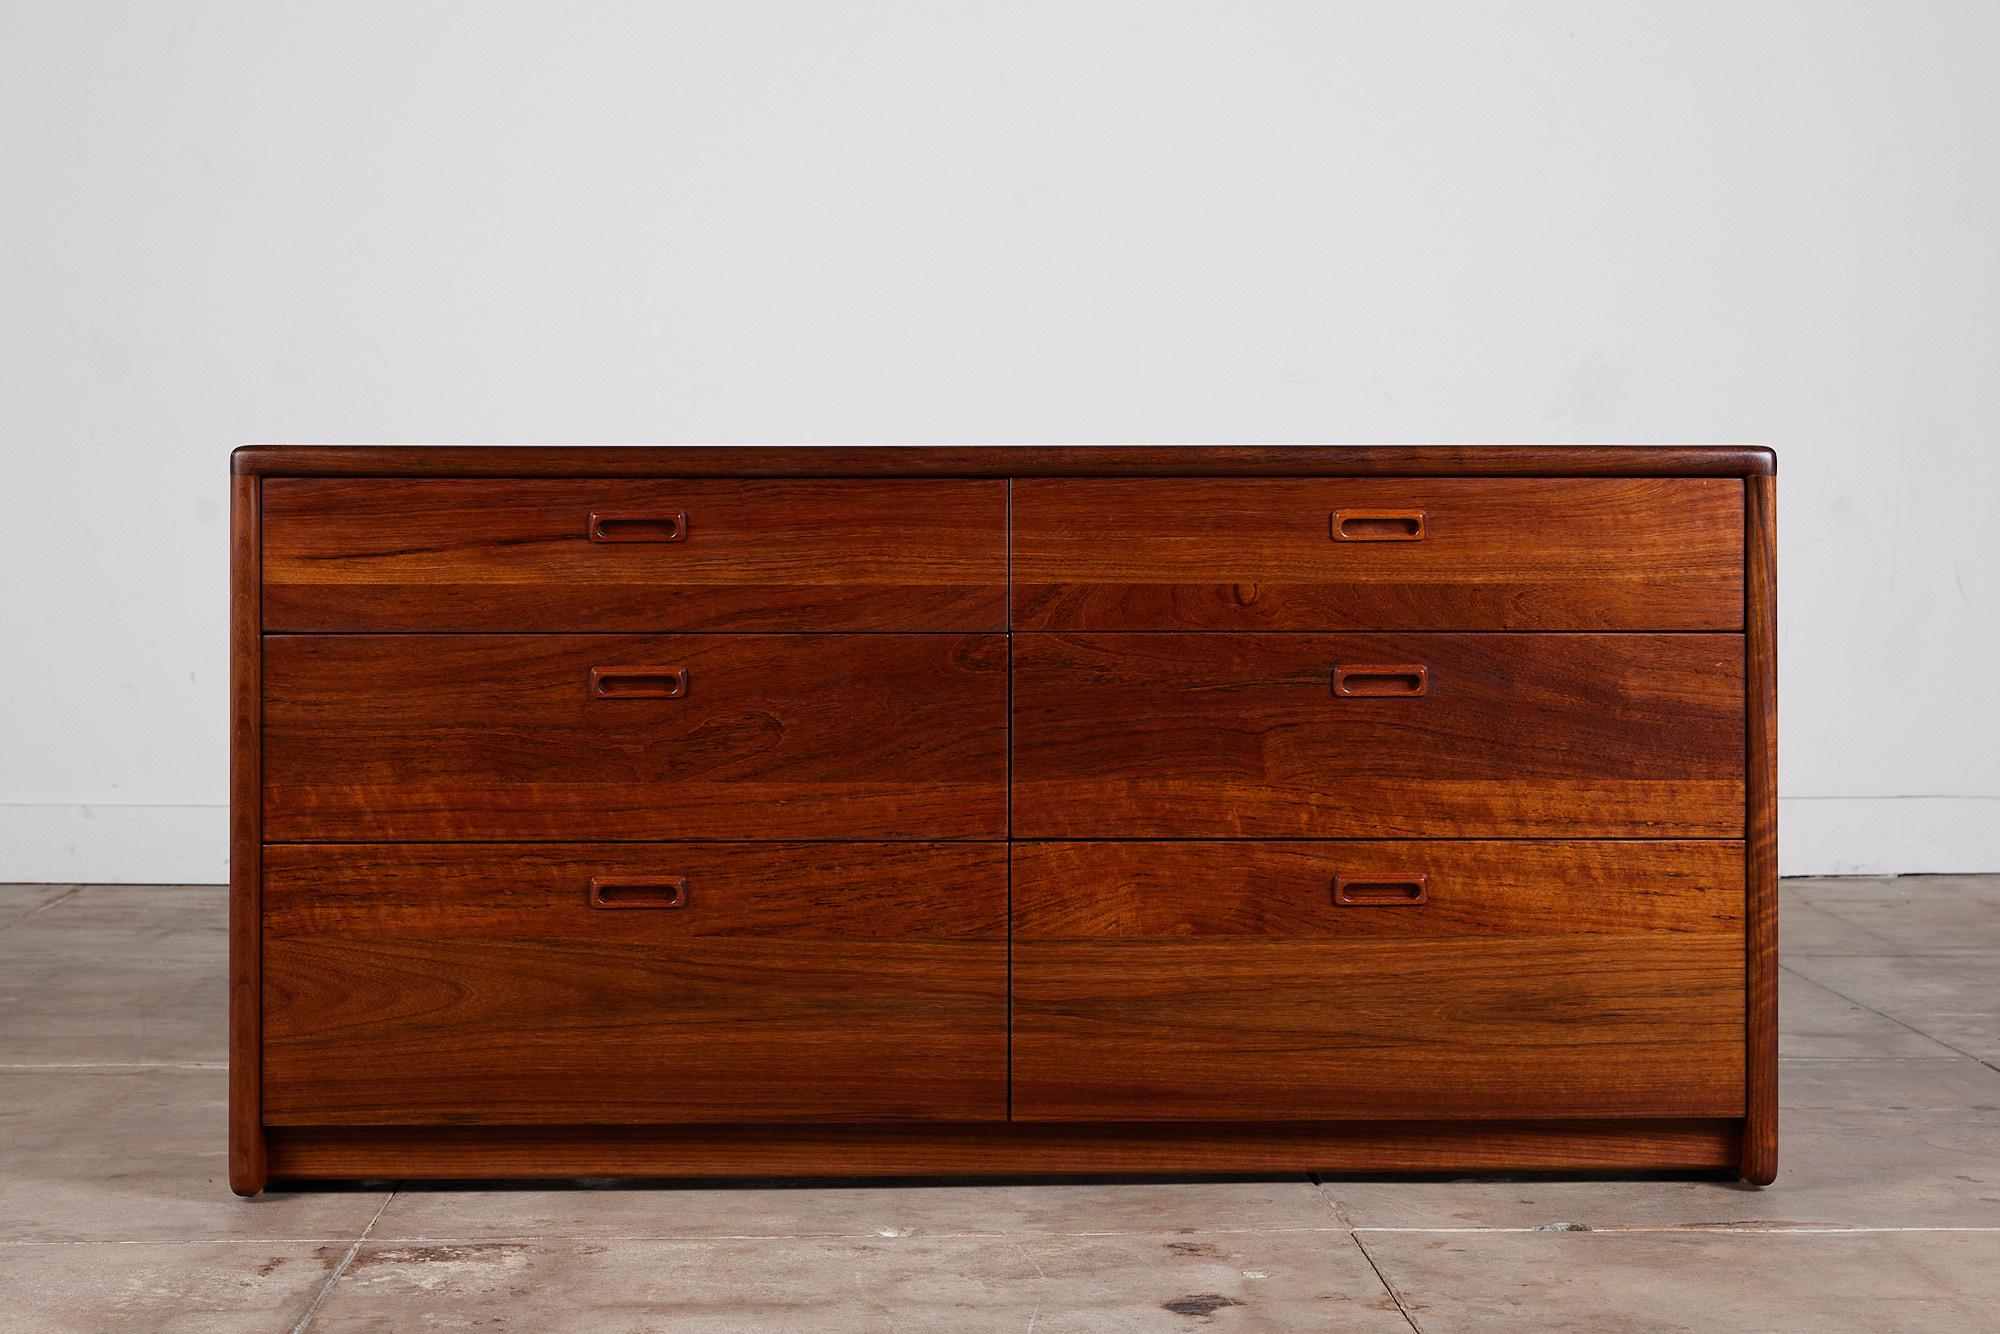 Dresser by Gerald McCabe for Eon Furniture circa 1970s, USA. The Shedua wood dresser, also known as African walnut, features soft rounded edges with six drawers. Each drawer has an inset drawer pull.

Dimensions: 60